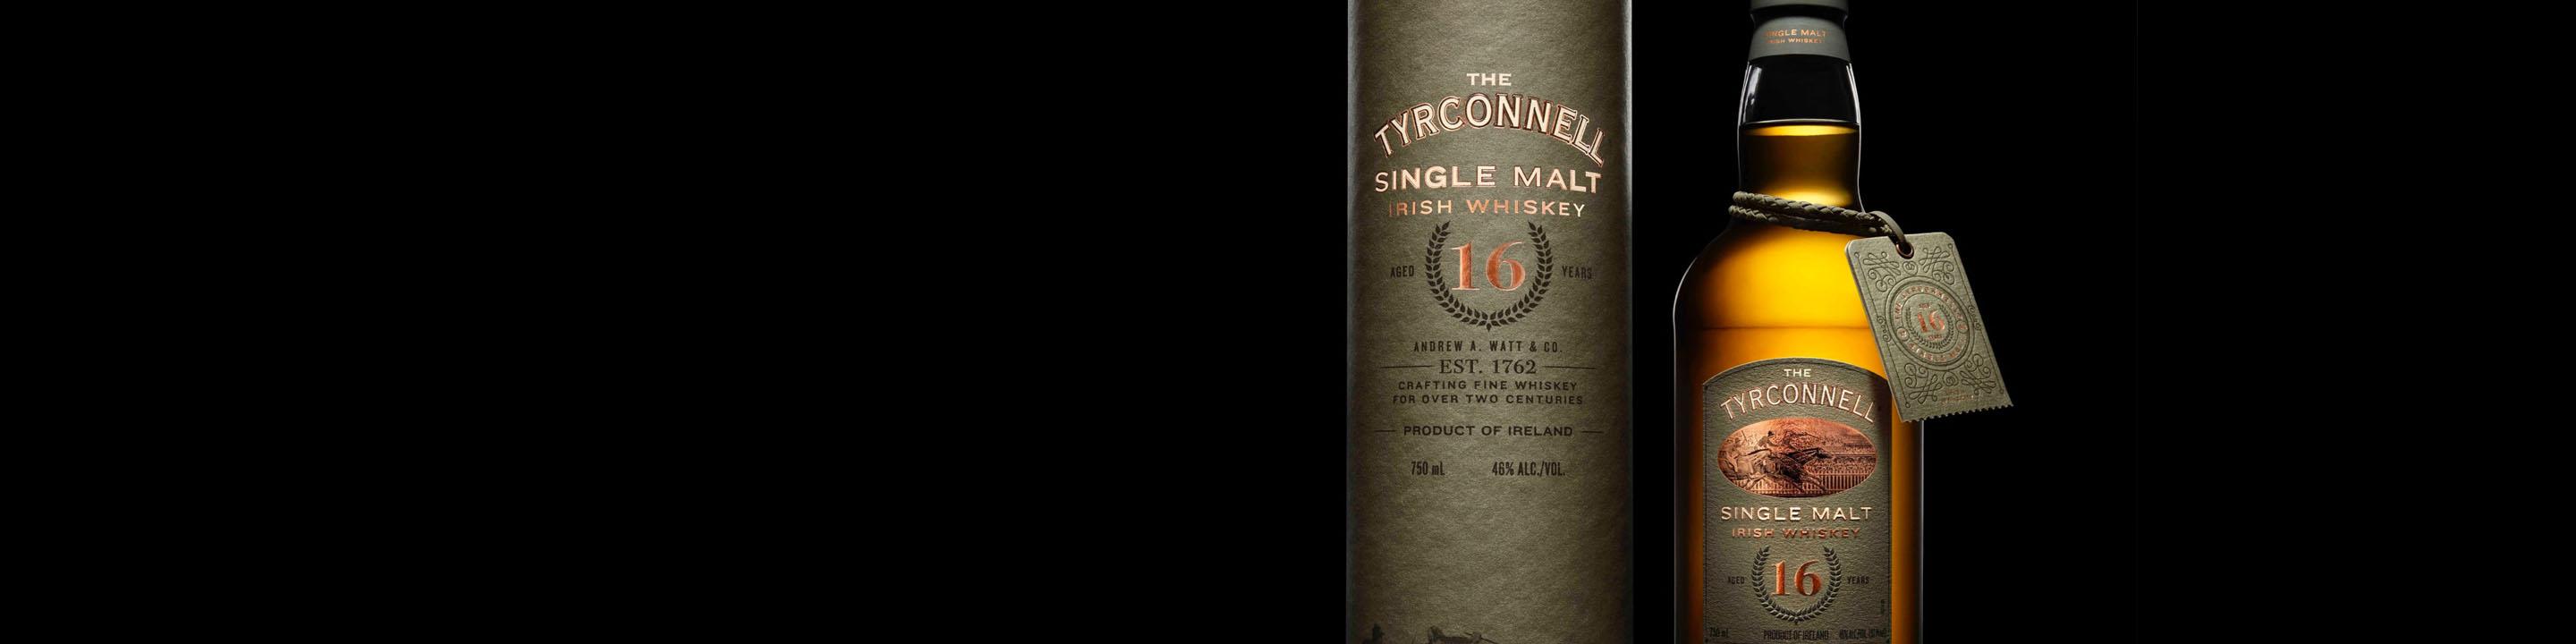 The legend of The Tyrconnell® was born in 1876, when R.M. Delamere entered his chestnut colt, Tyrconnell, in the prestigious National Product Stakes horse race. Fortune found favor with Delamere that afternoon, as Tyrconnell bested horses and oddsmakers alike on his march to victory. The surprise victory captured the imagination of the assembled crowd, which included the Watts, a local family who had built a thriving whiskey distillery. They chose to commemorate the occasion by creating a limited edition, small batch whiskey that bore the name of their local champion. 

Buy Tyrconnell online now from nearby liquor stores via Minibar Delivery.